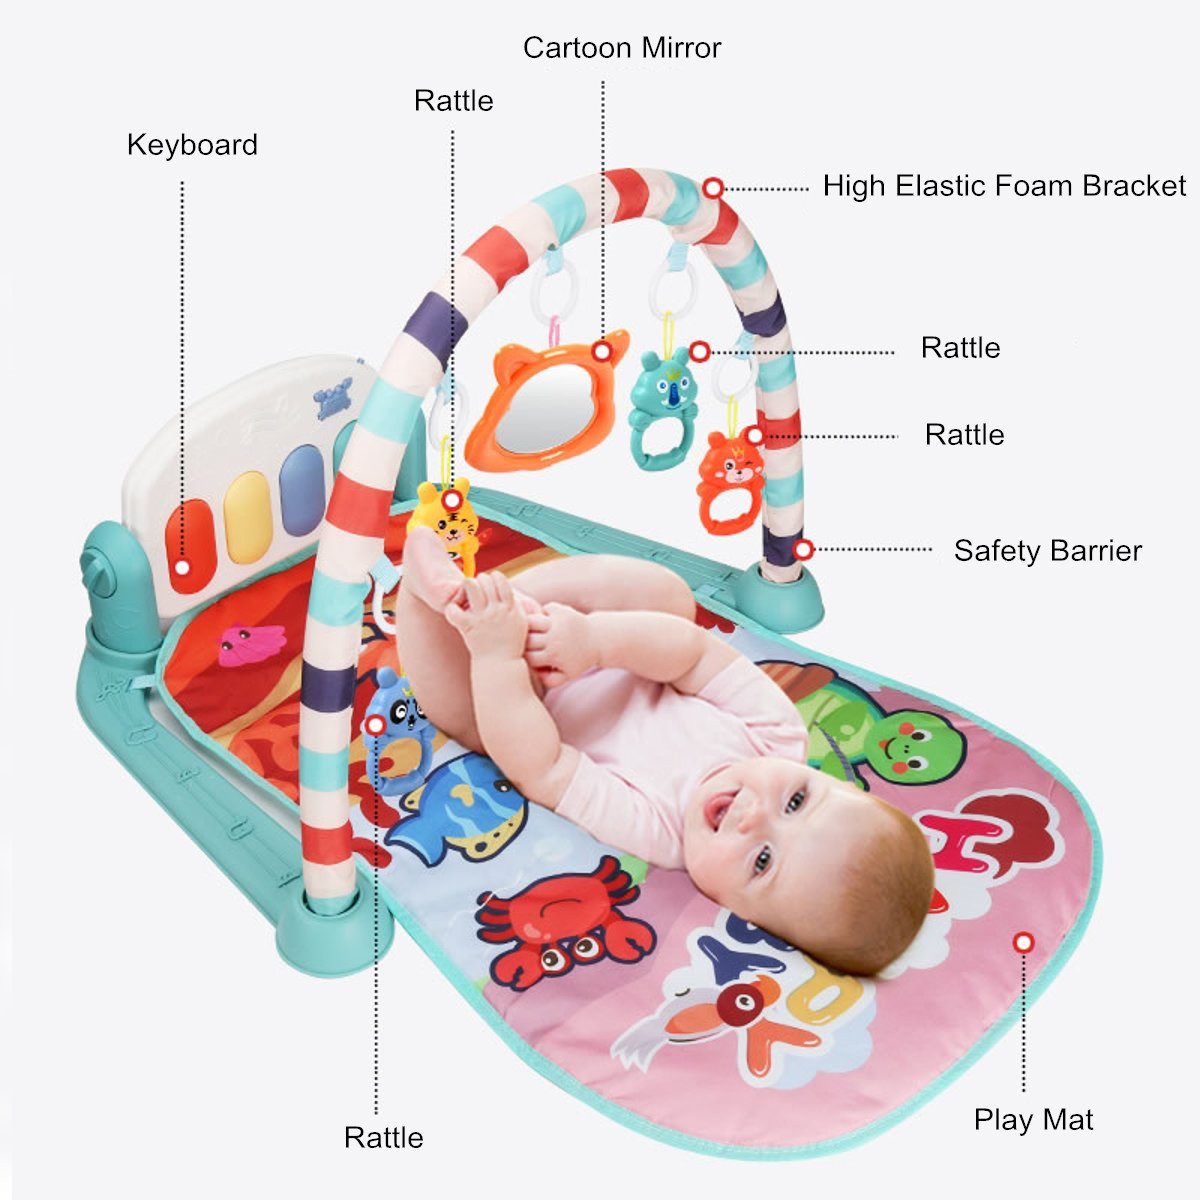 765643CM-2-IN-1-Multi-functional-Baby-Gym-with-Play-Mat-Keyboard-Soft-Light-Rattle-Toys-for-Baby-Gif-1709556-7